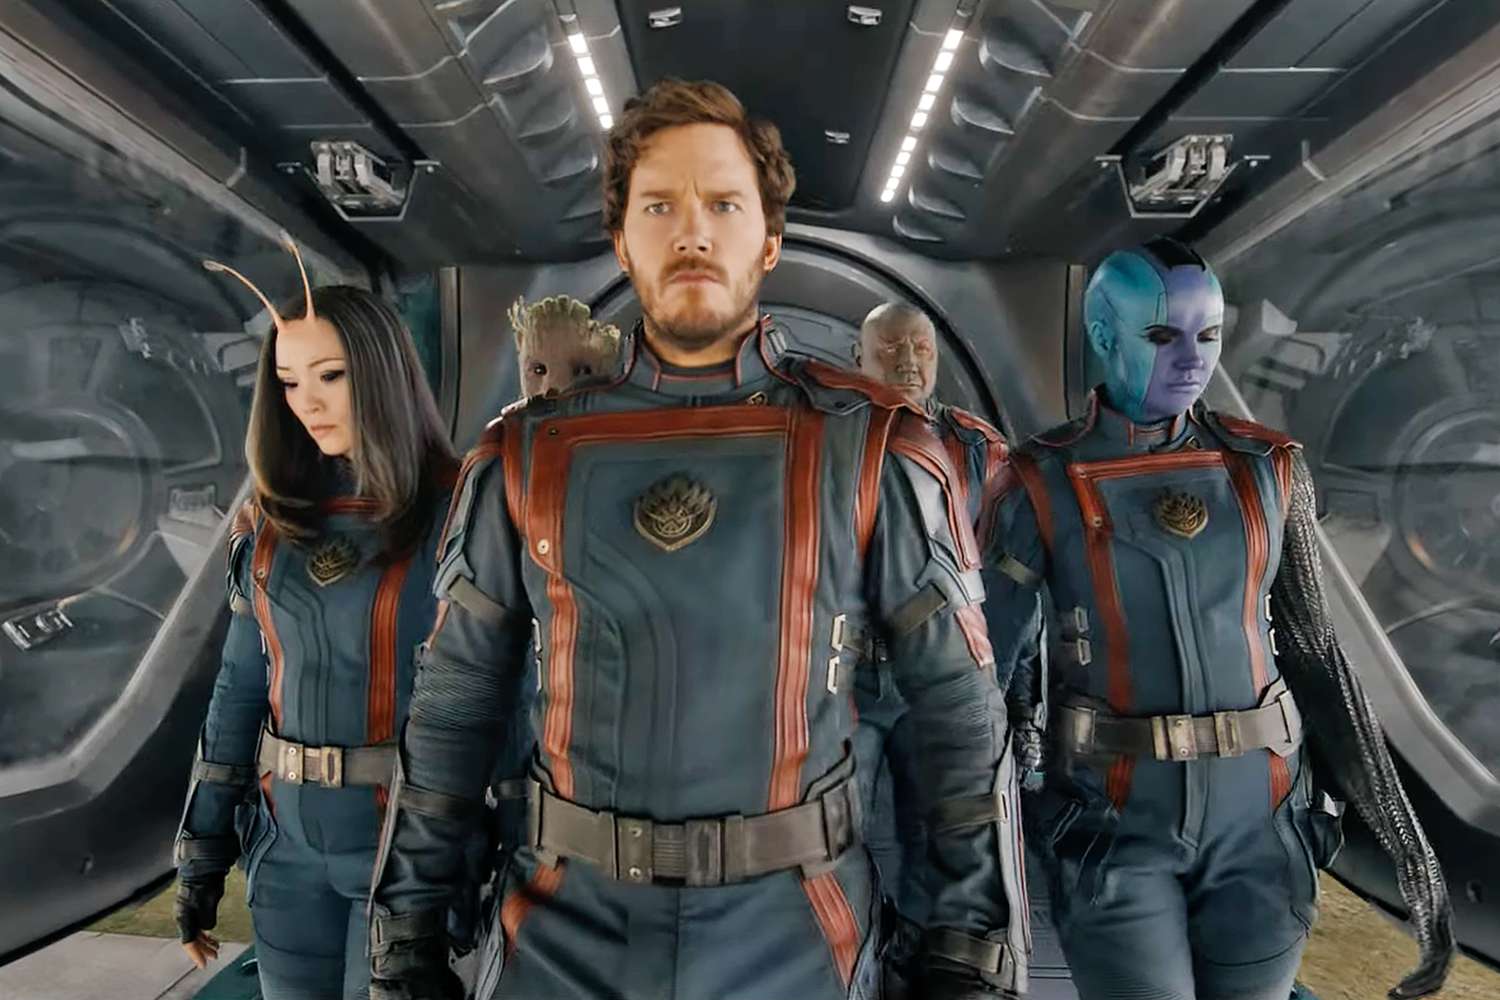 Marvel Releases ‘Guardians Of The Galaxy Vol. 3’ Trailer At CCXP22, Footage Hints at Origin and Fate of the Team